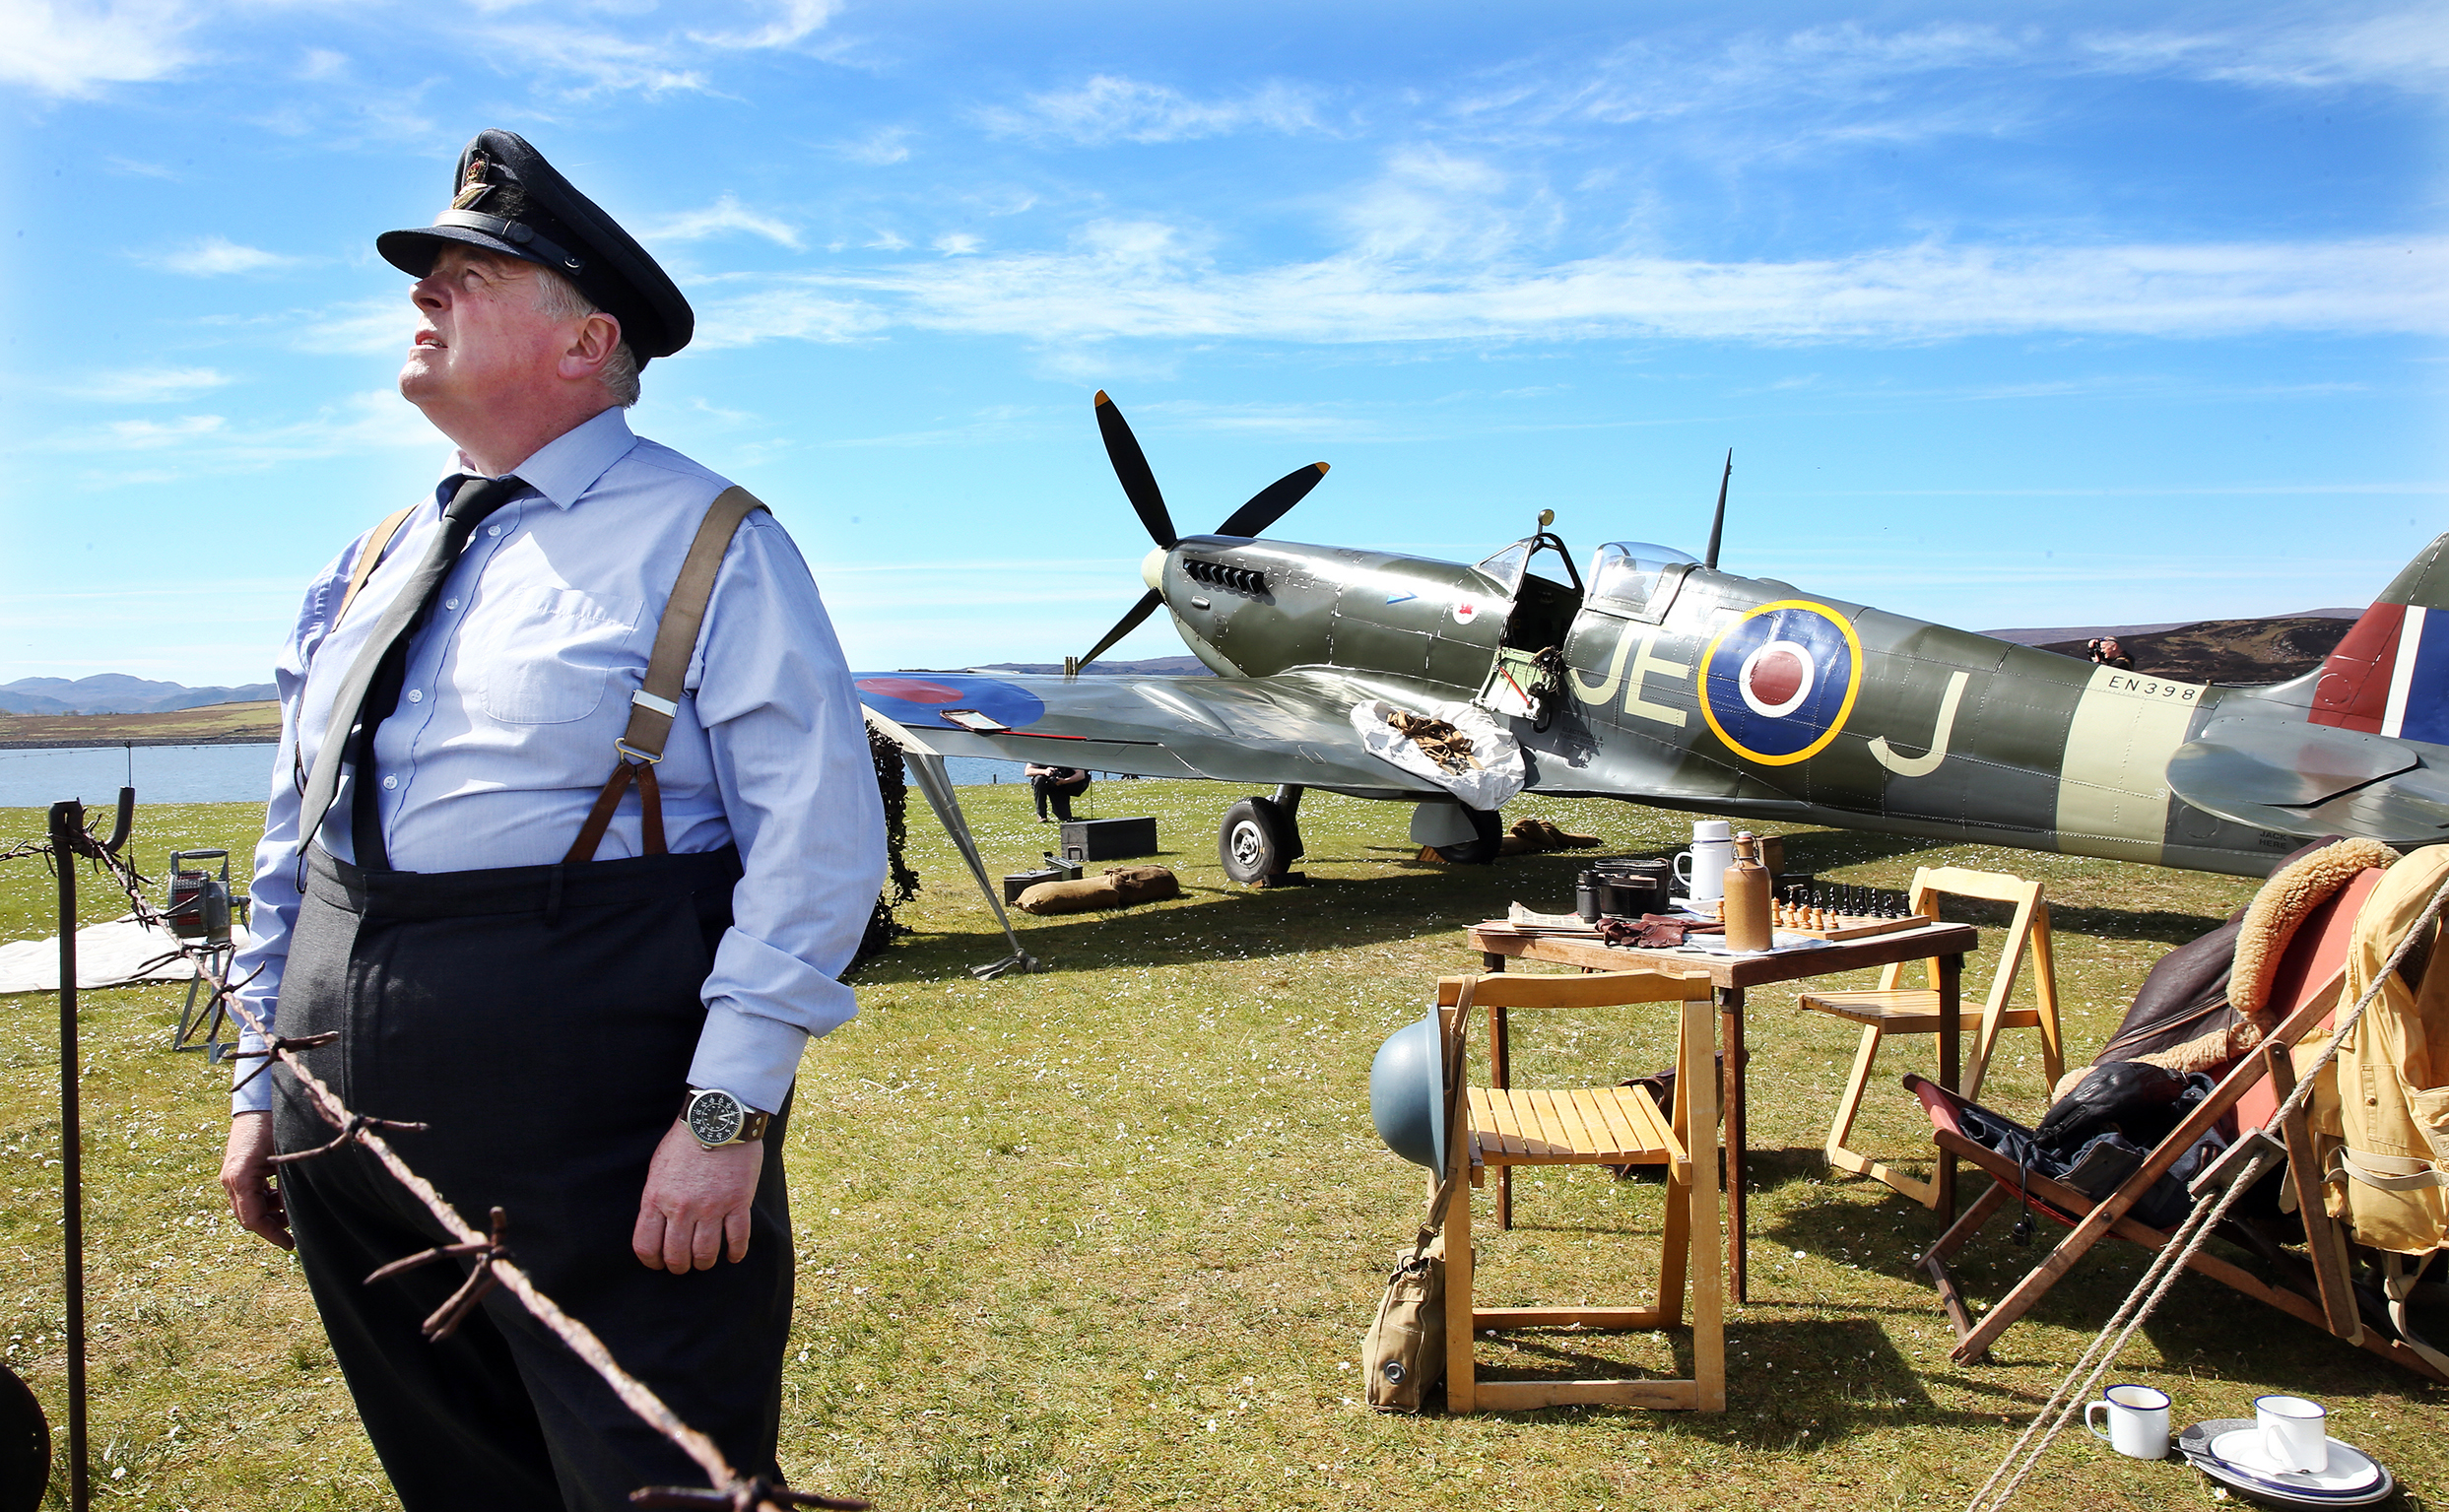 A replica Spitfire on display at the Battle of Britain camp in Aultbea, with pilot Mark Anthony Craig.